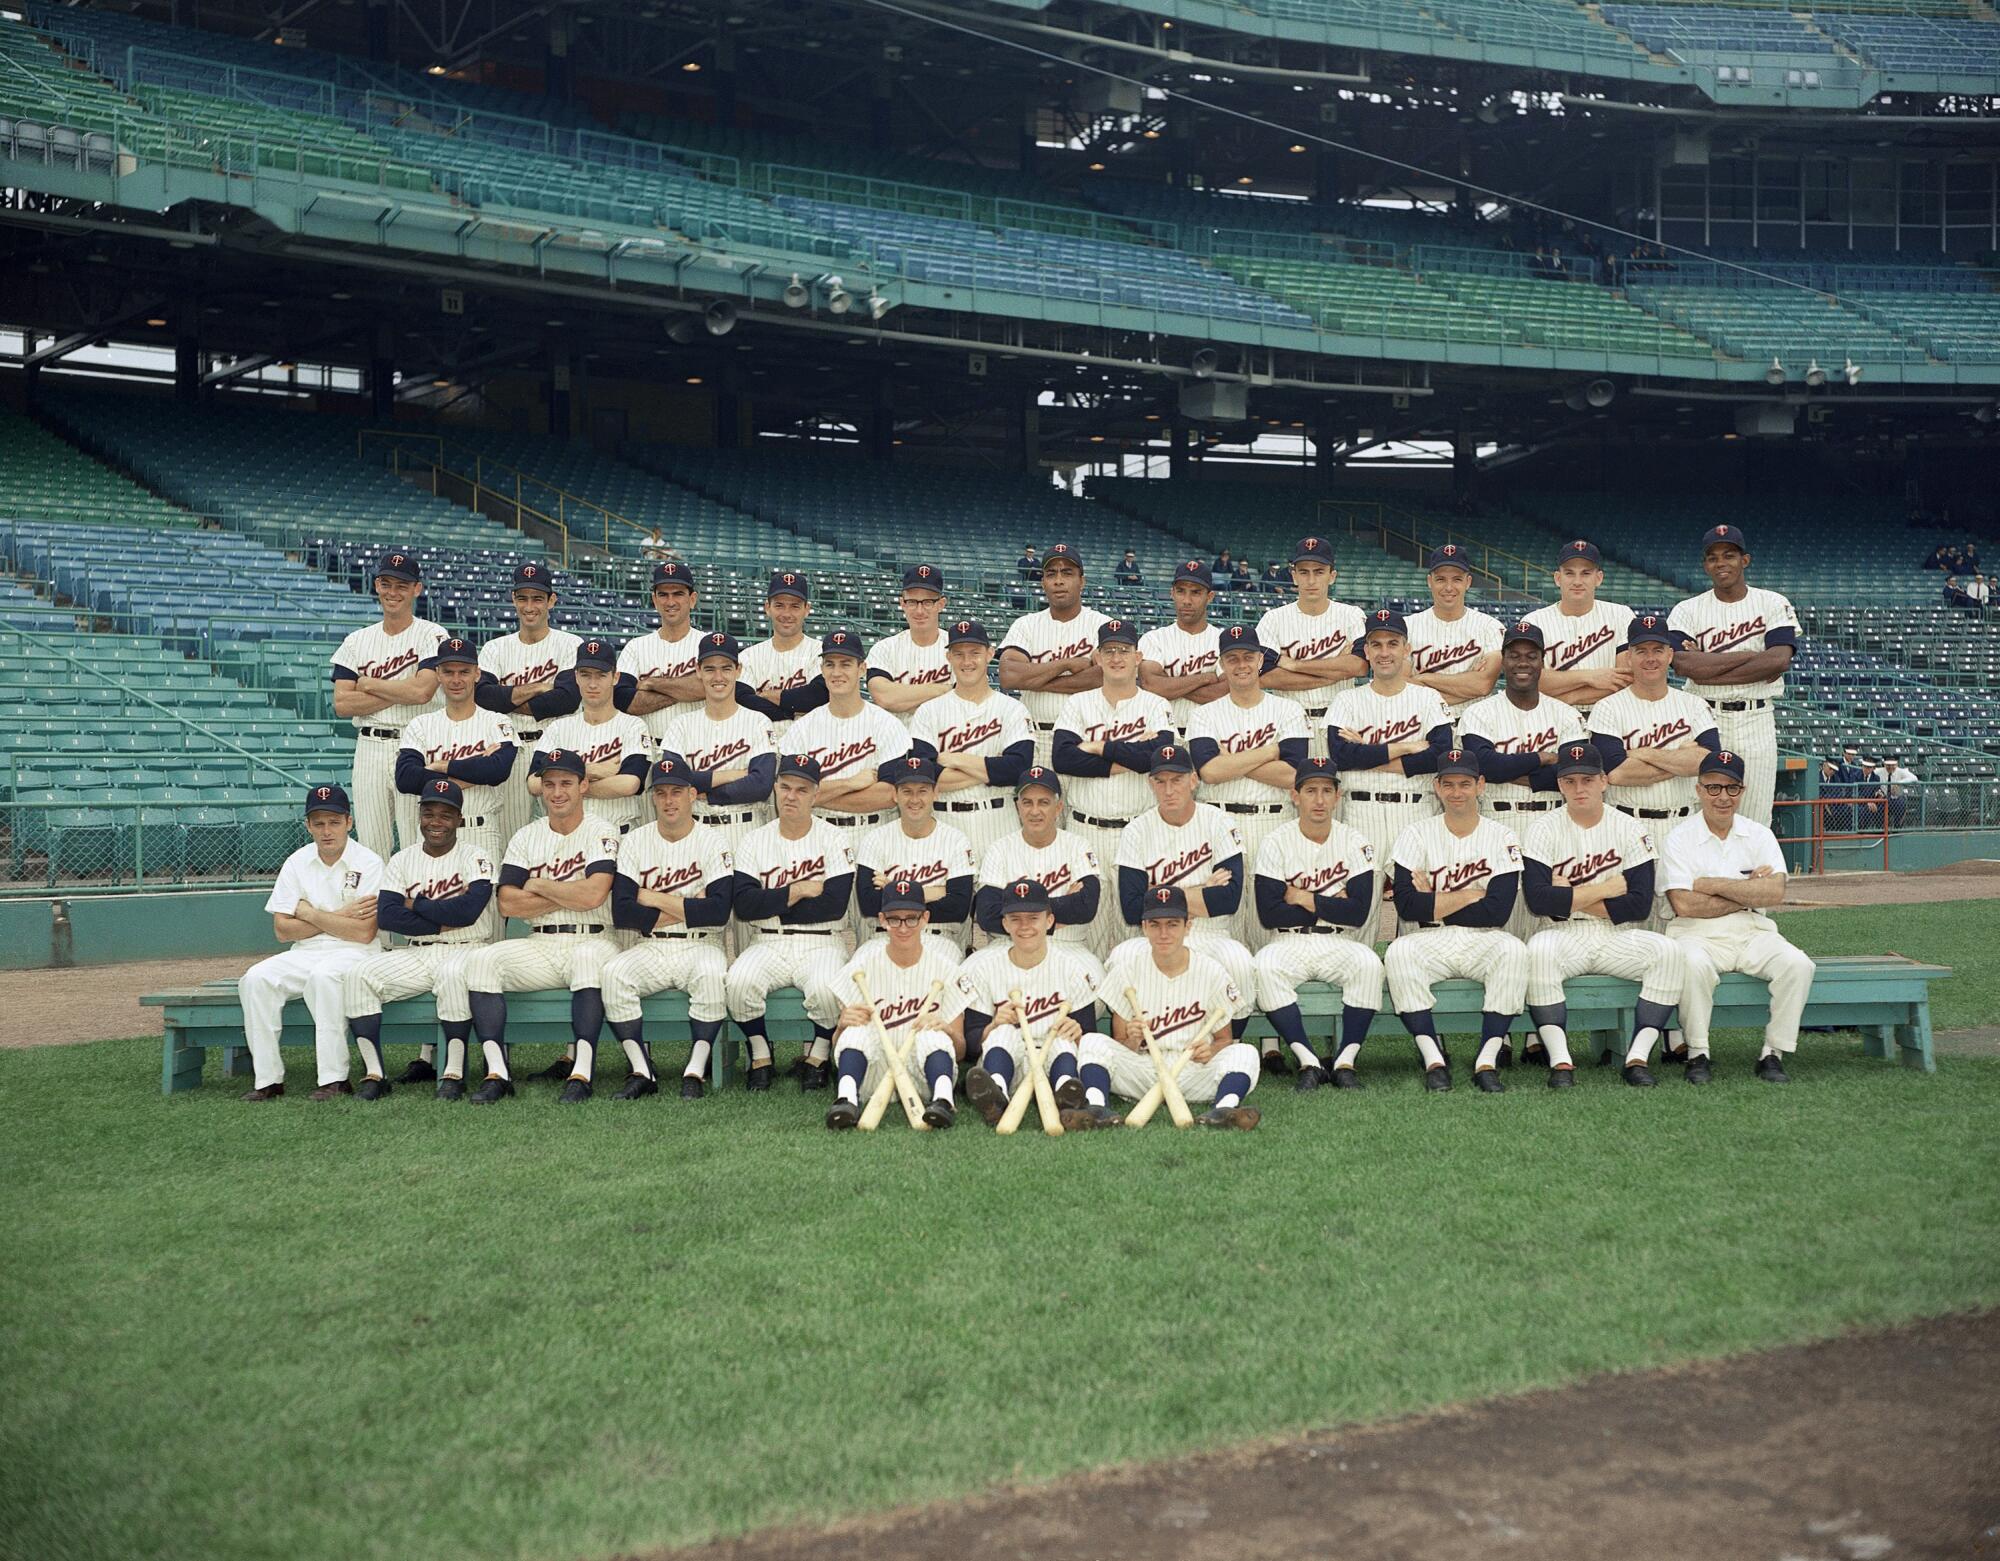 Team photo of the 1965 Twins